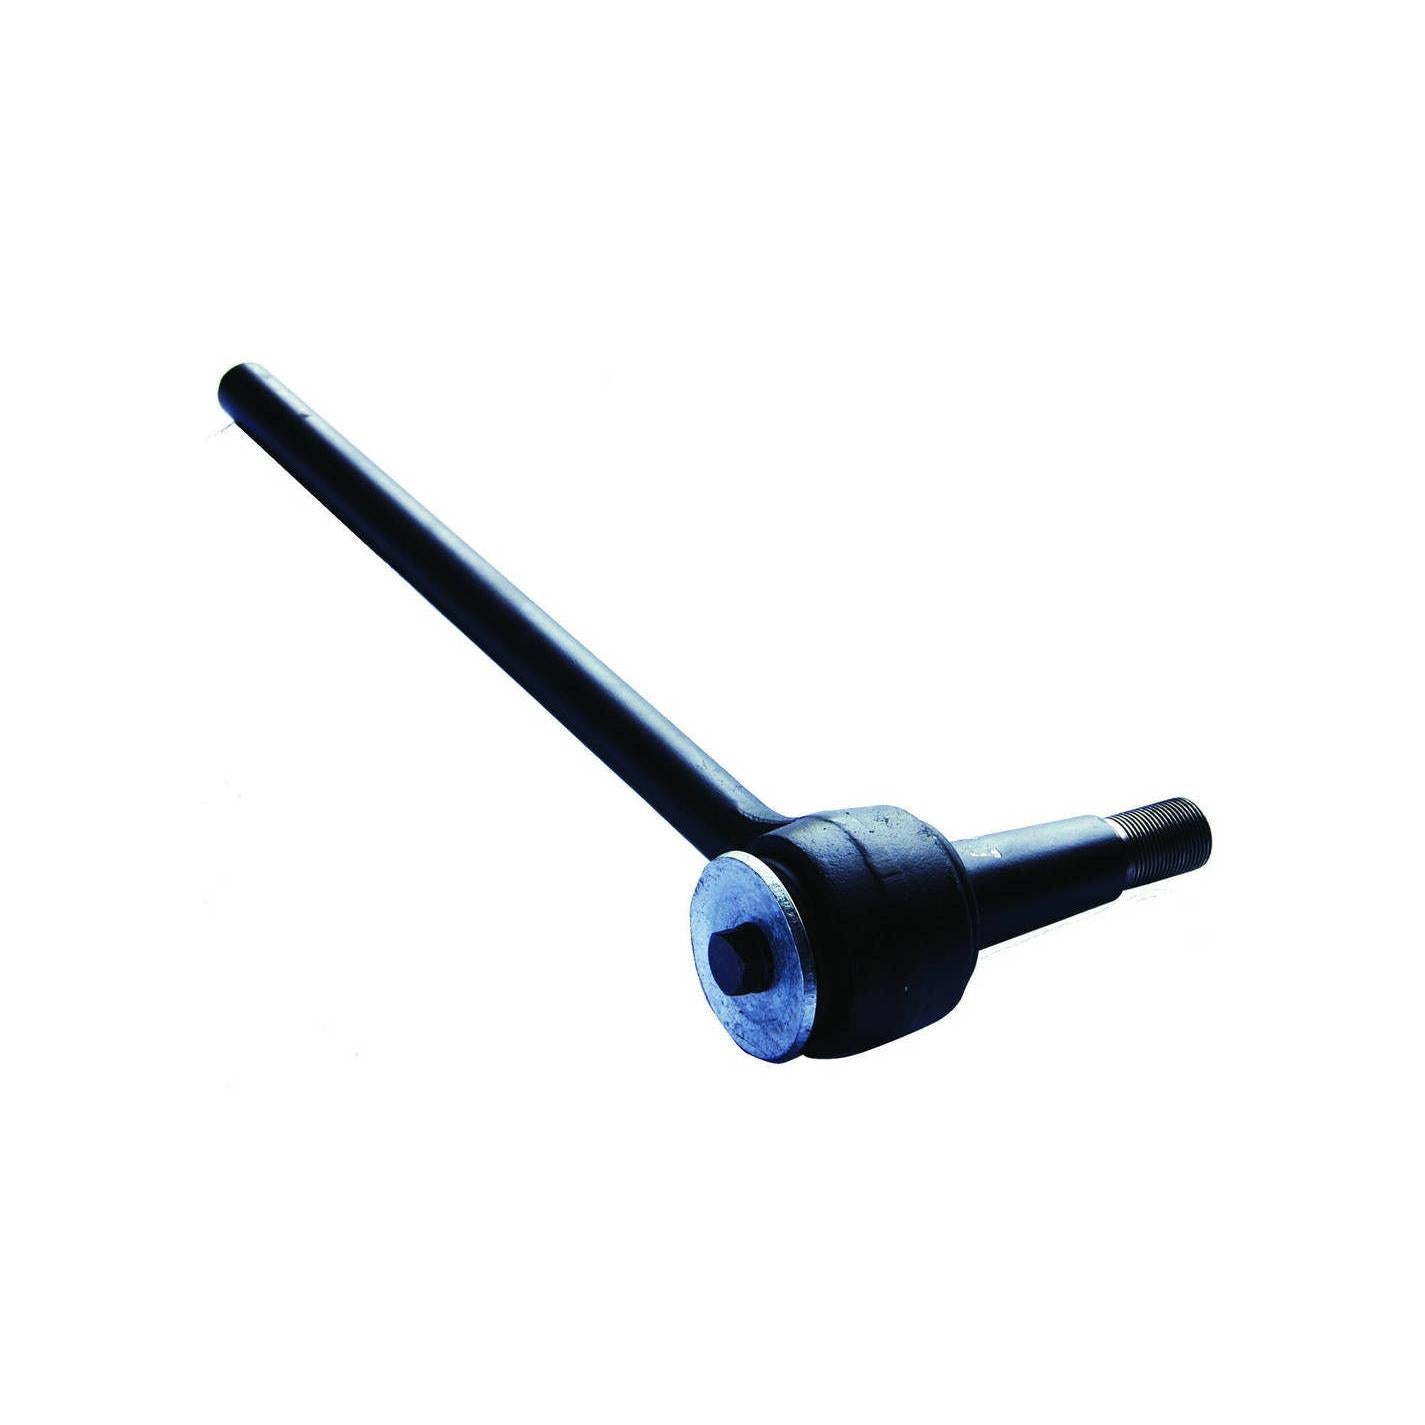 Torque Rod with Bush - Poly - Replaces 66681-000, 44697-000